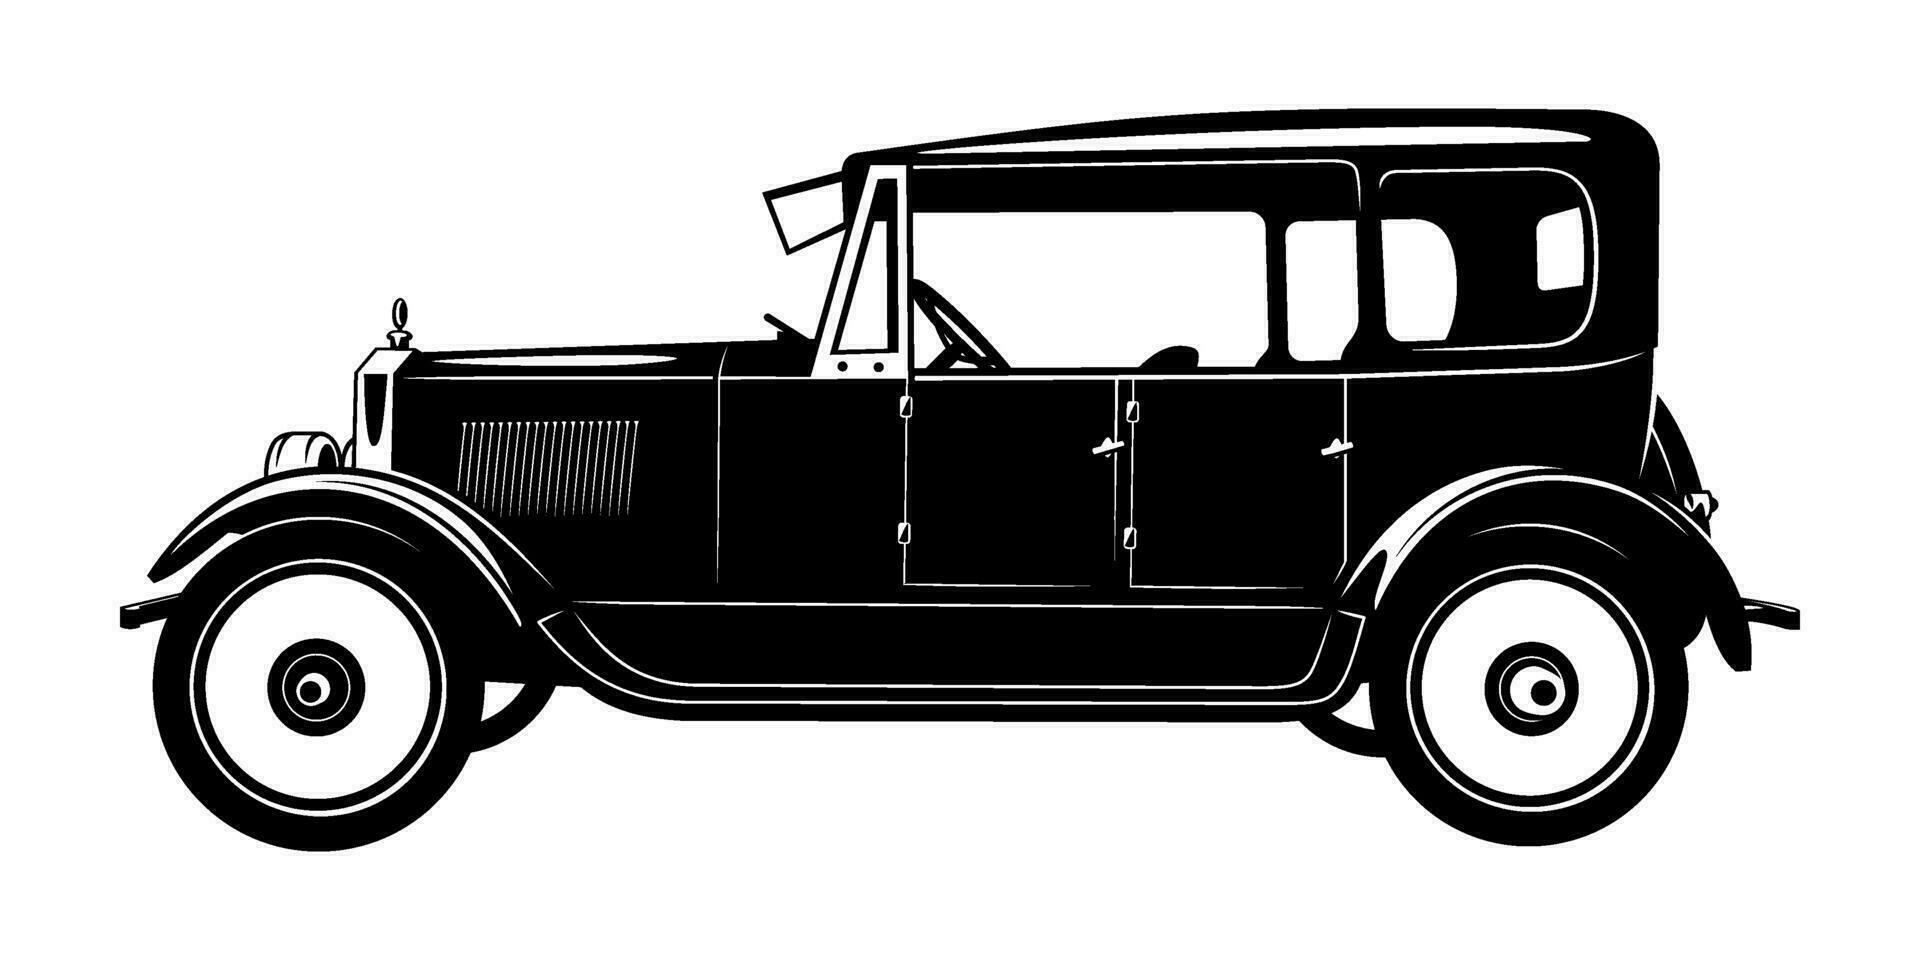 Vintage Retro Car of 20s. Vector silhouette isolated on white.